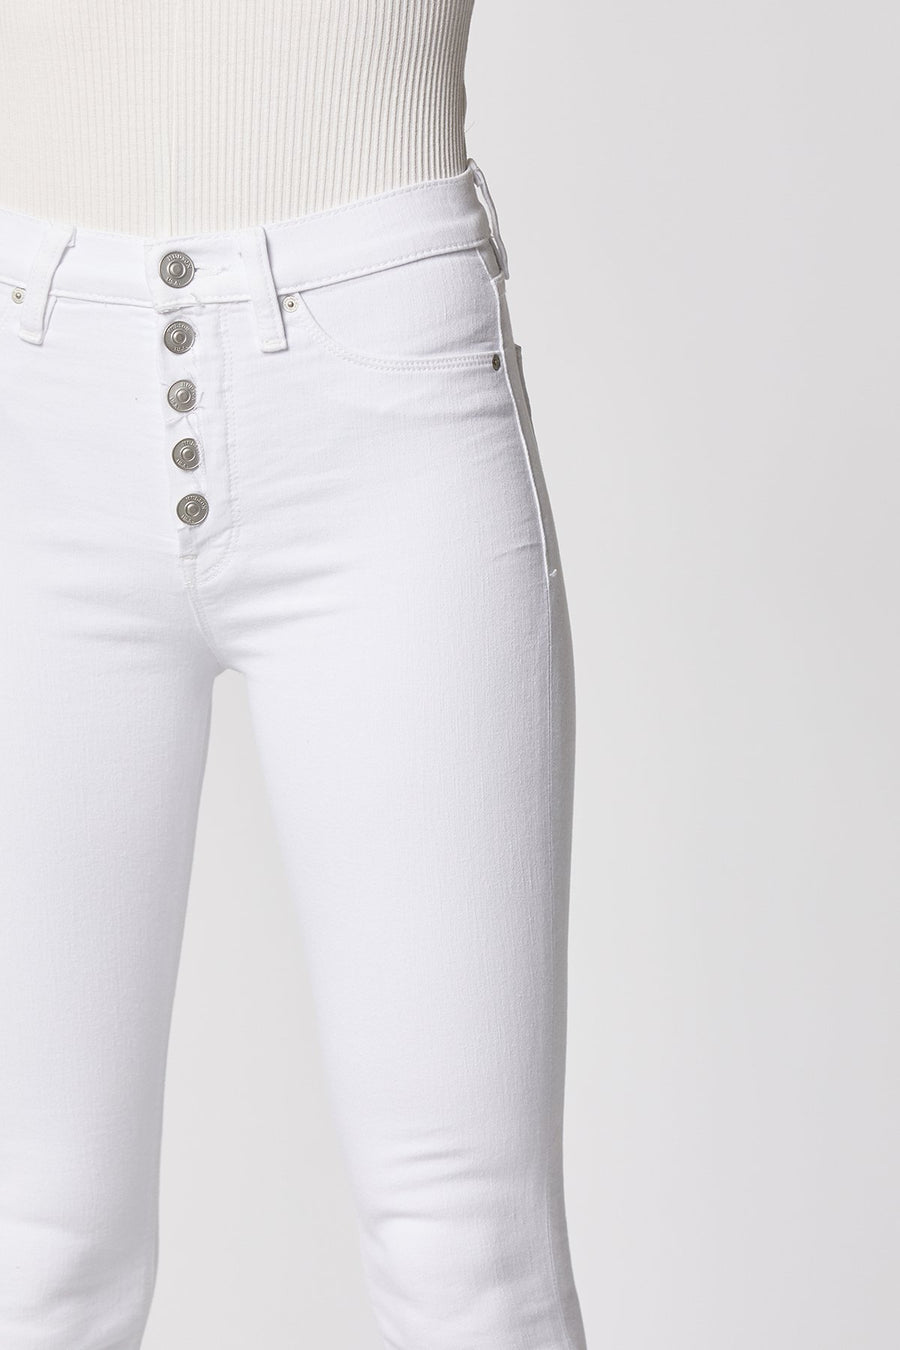 HUDSON JEANS Barbara High Rise with Button-Front in White